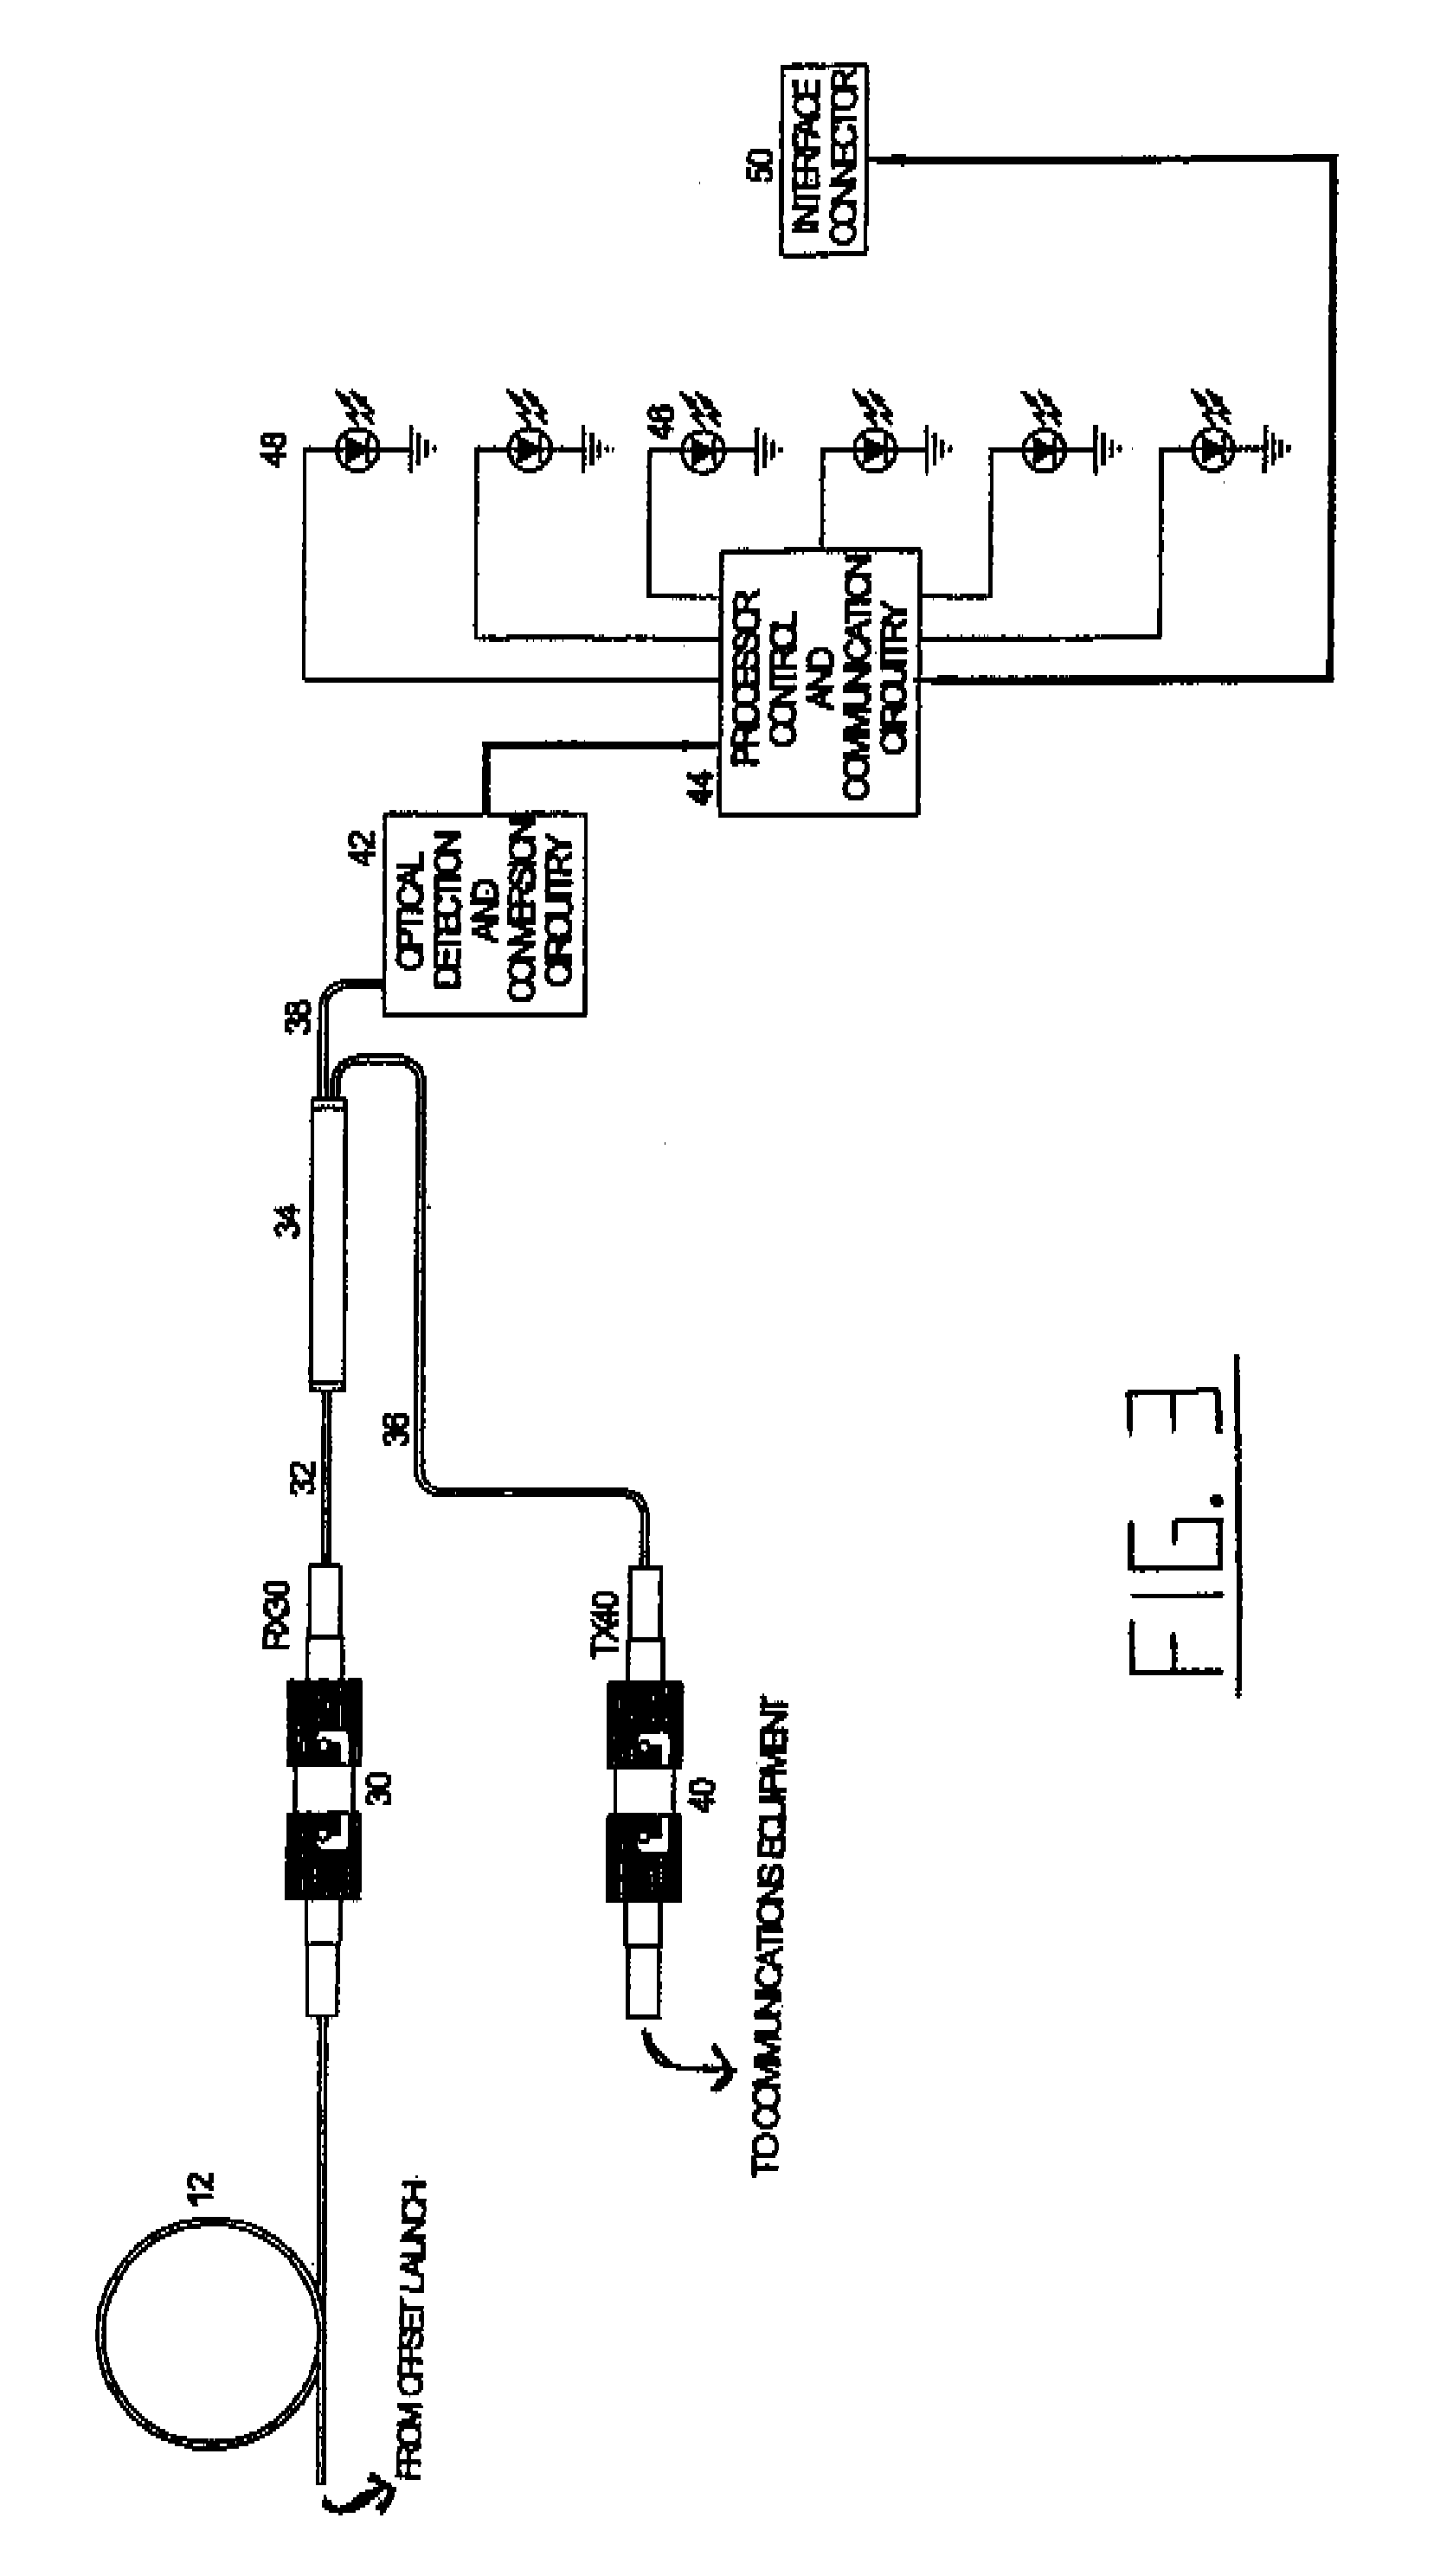 Intrusion detection system for a multimode optical fiber using a bulk optical wavelength division multiplexer for maintaining modal power distribution